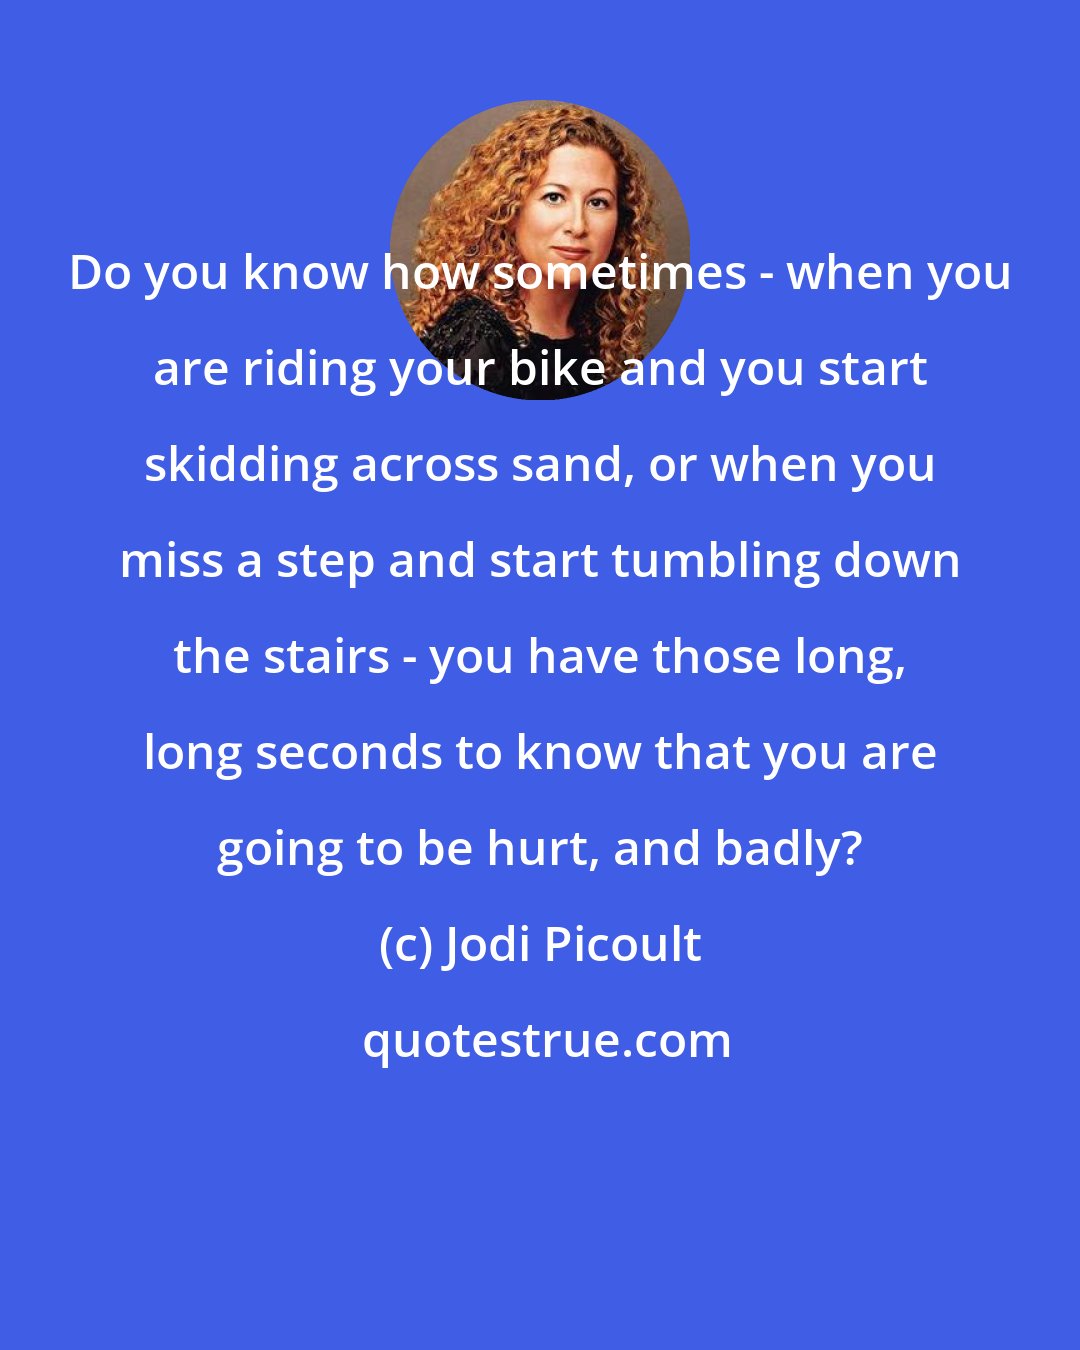 Jodi Picoult: Do you know how sometimes - when you are riding your bike and you start skidding across sand, or when you miss a step and start tumbling down the stairs - you have those long, long seconds to know that you are going to be hurt, and badly?